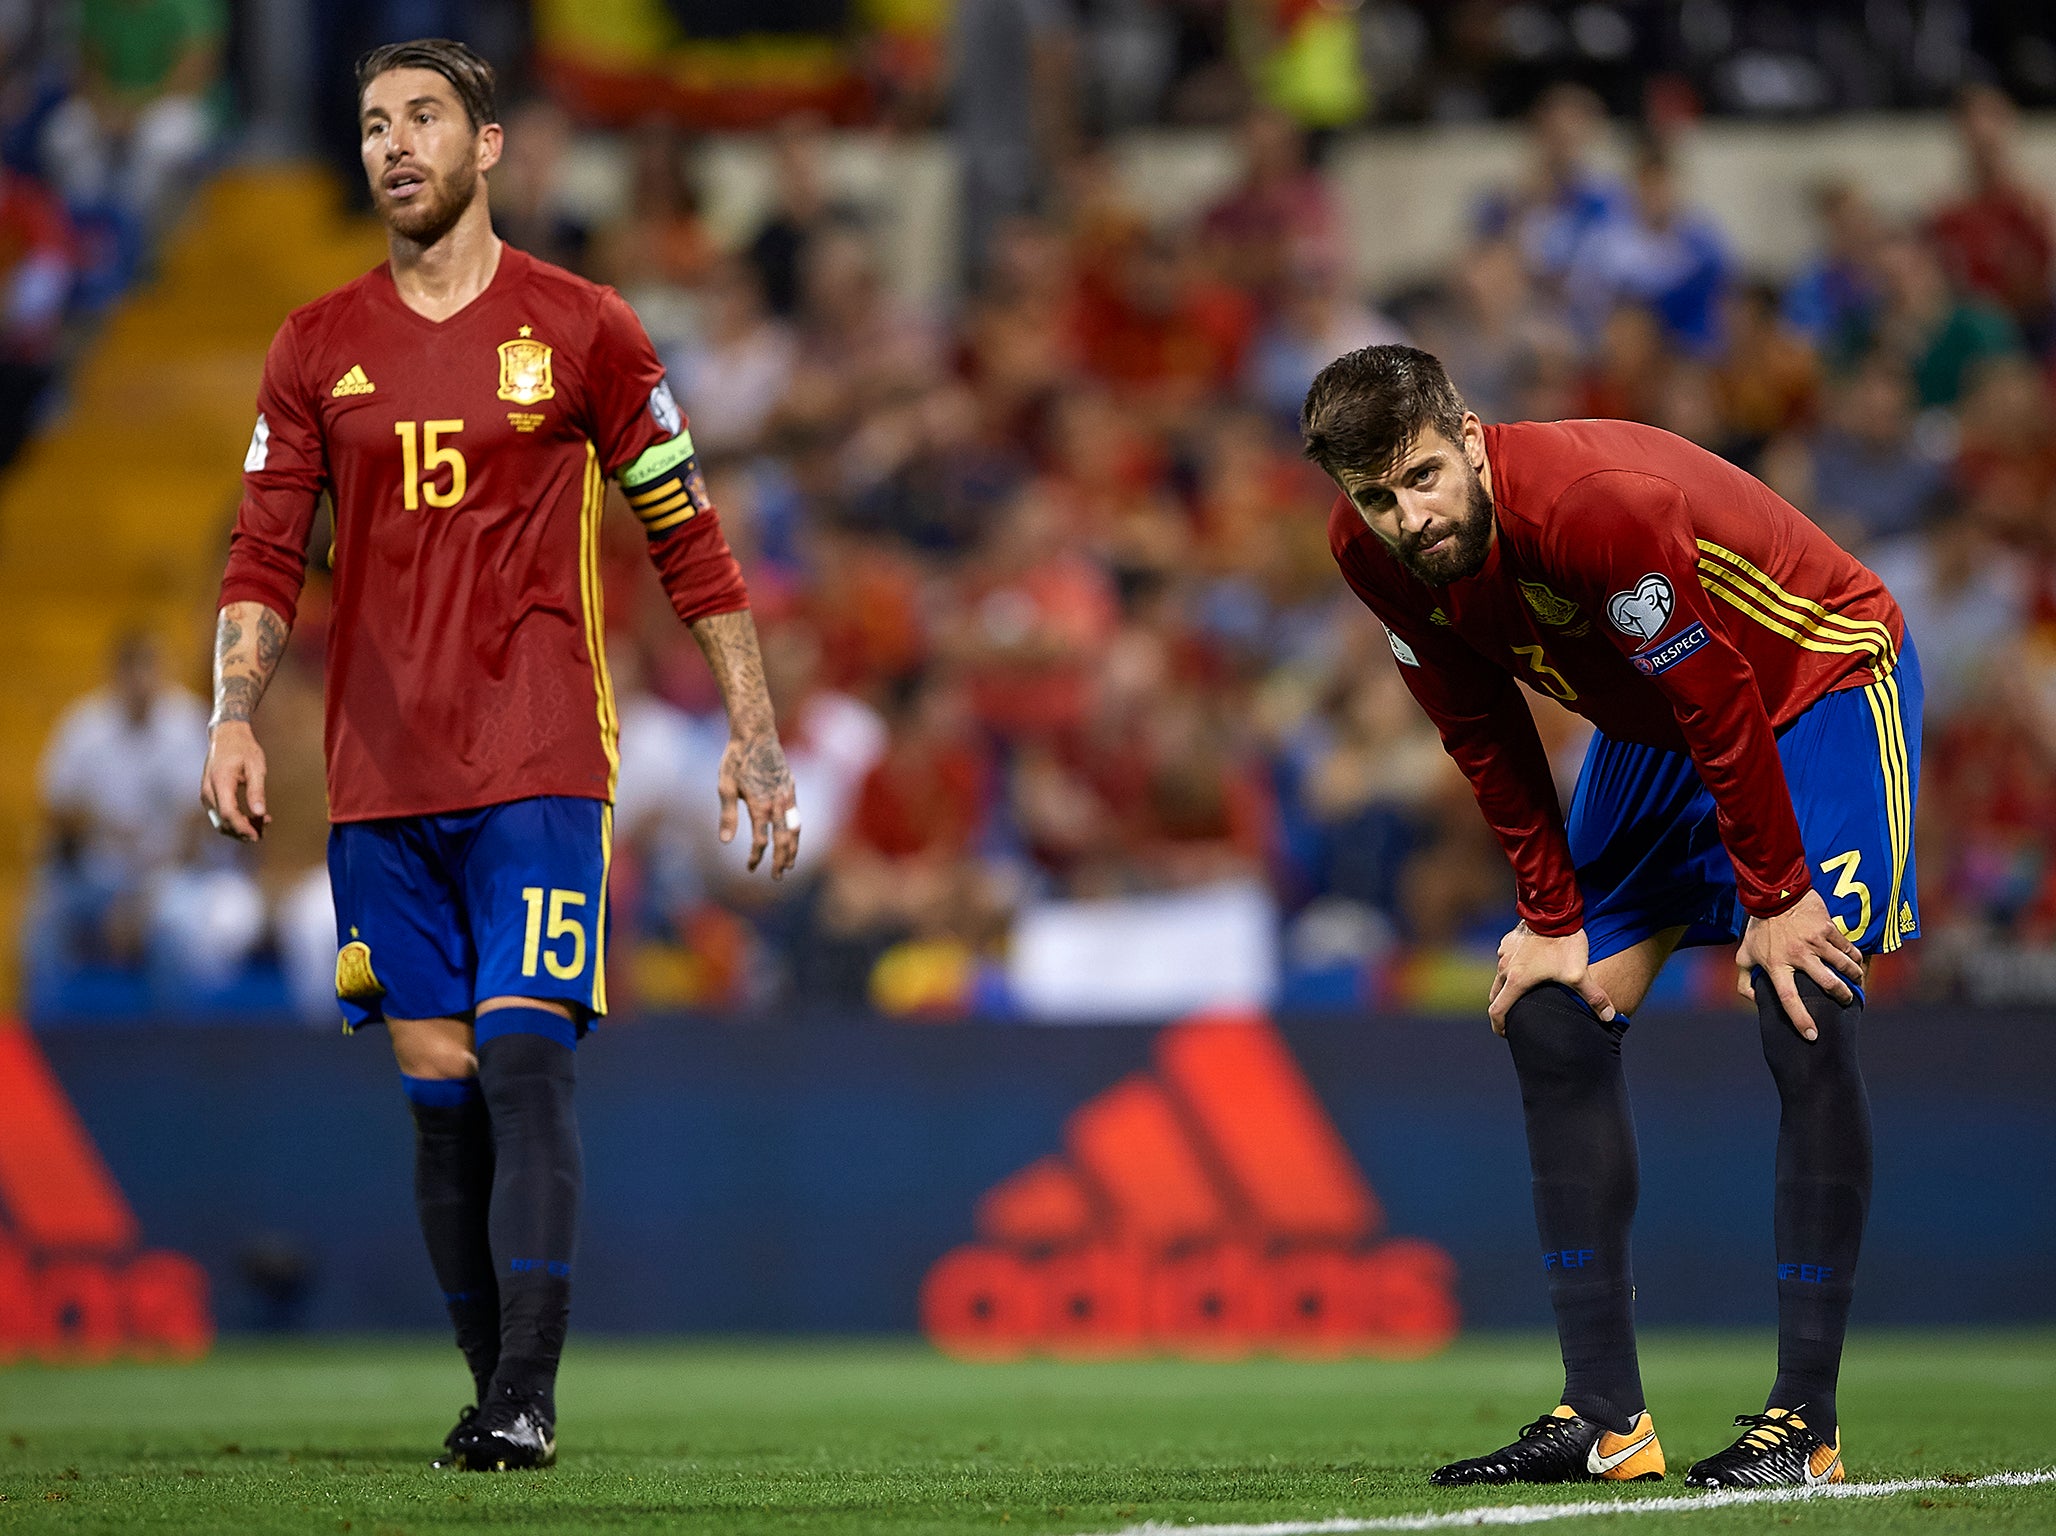 Spain's place at the Russian World Cup could be under threat